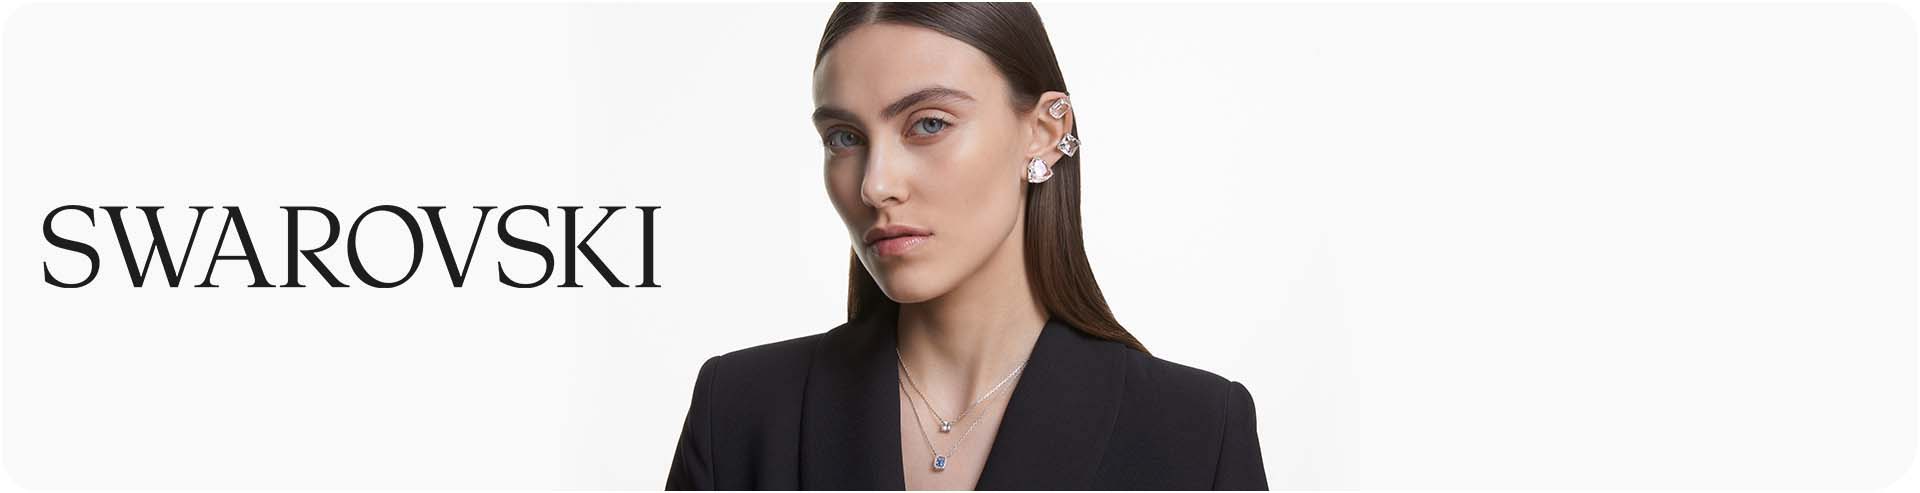 Woman wearing a collection of silver Swarovski jewellery including earrings and necklaces with the Swarovski logo